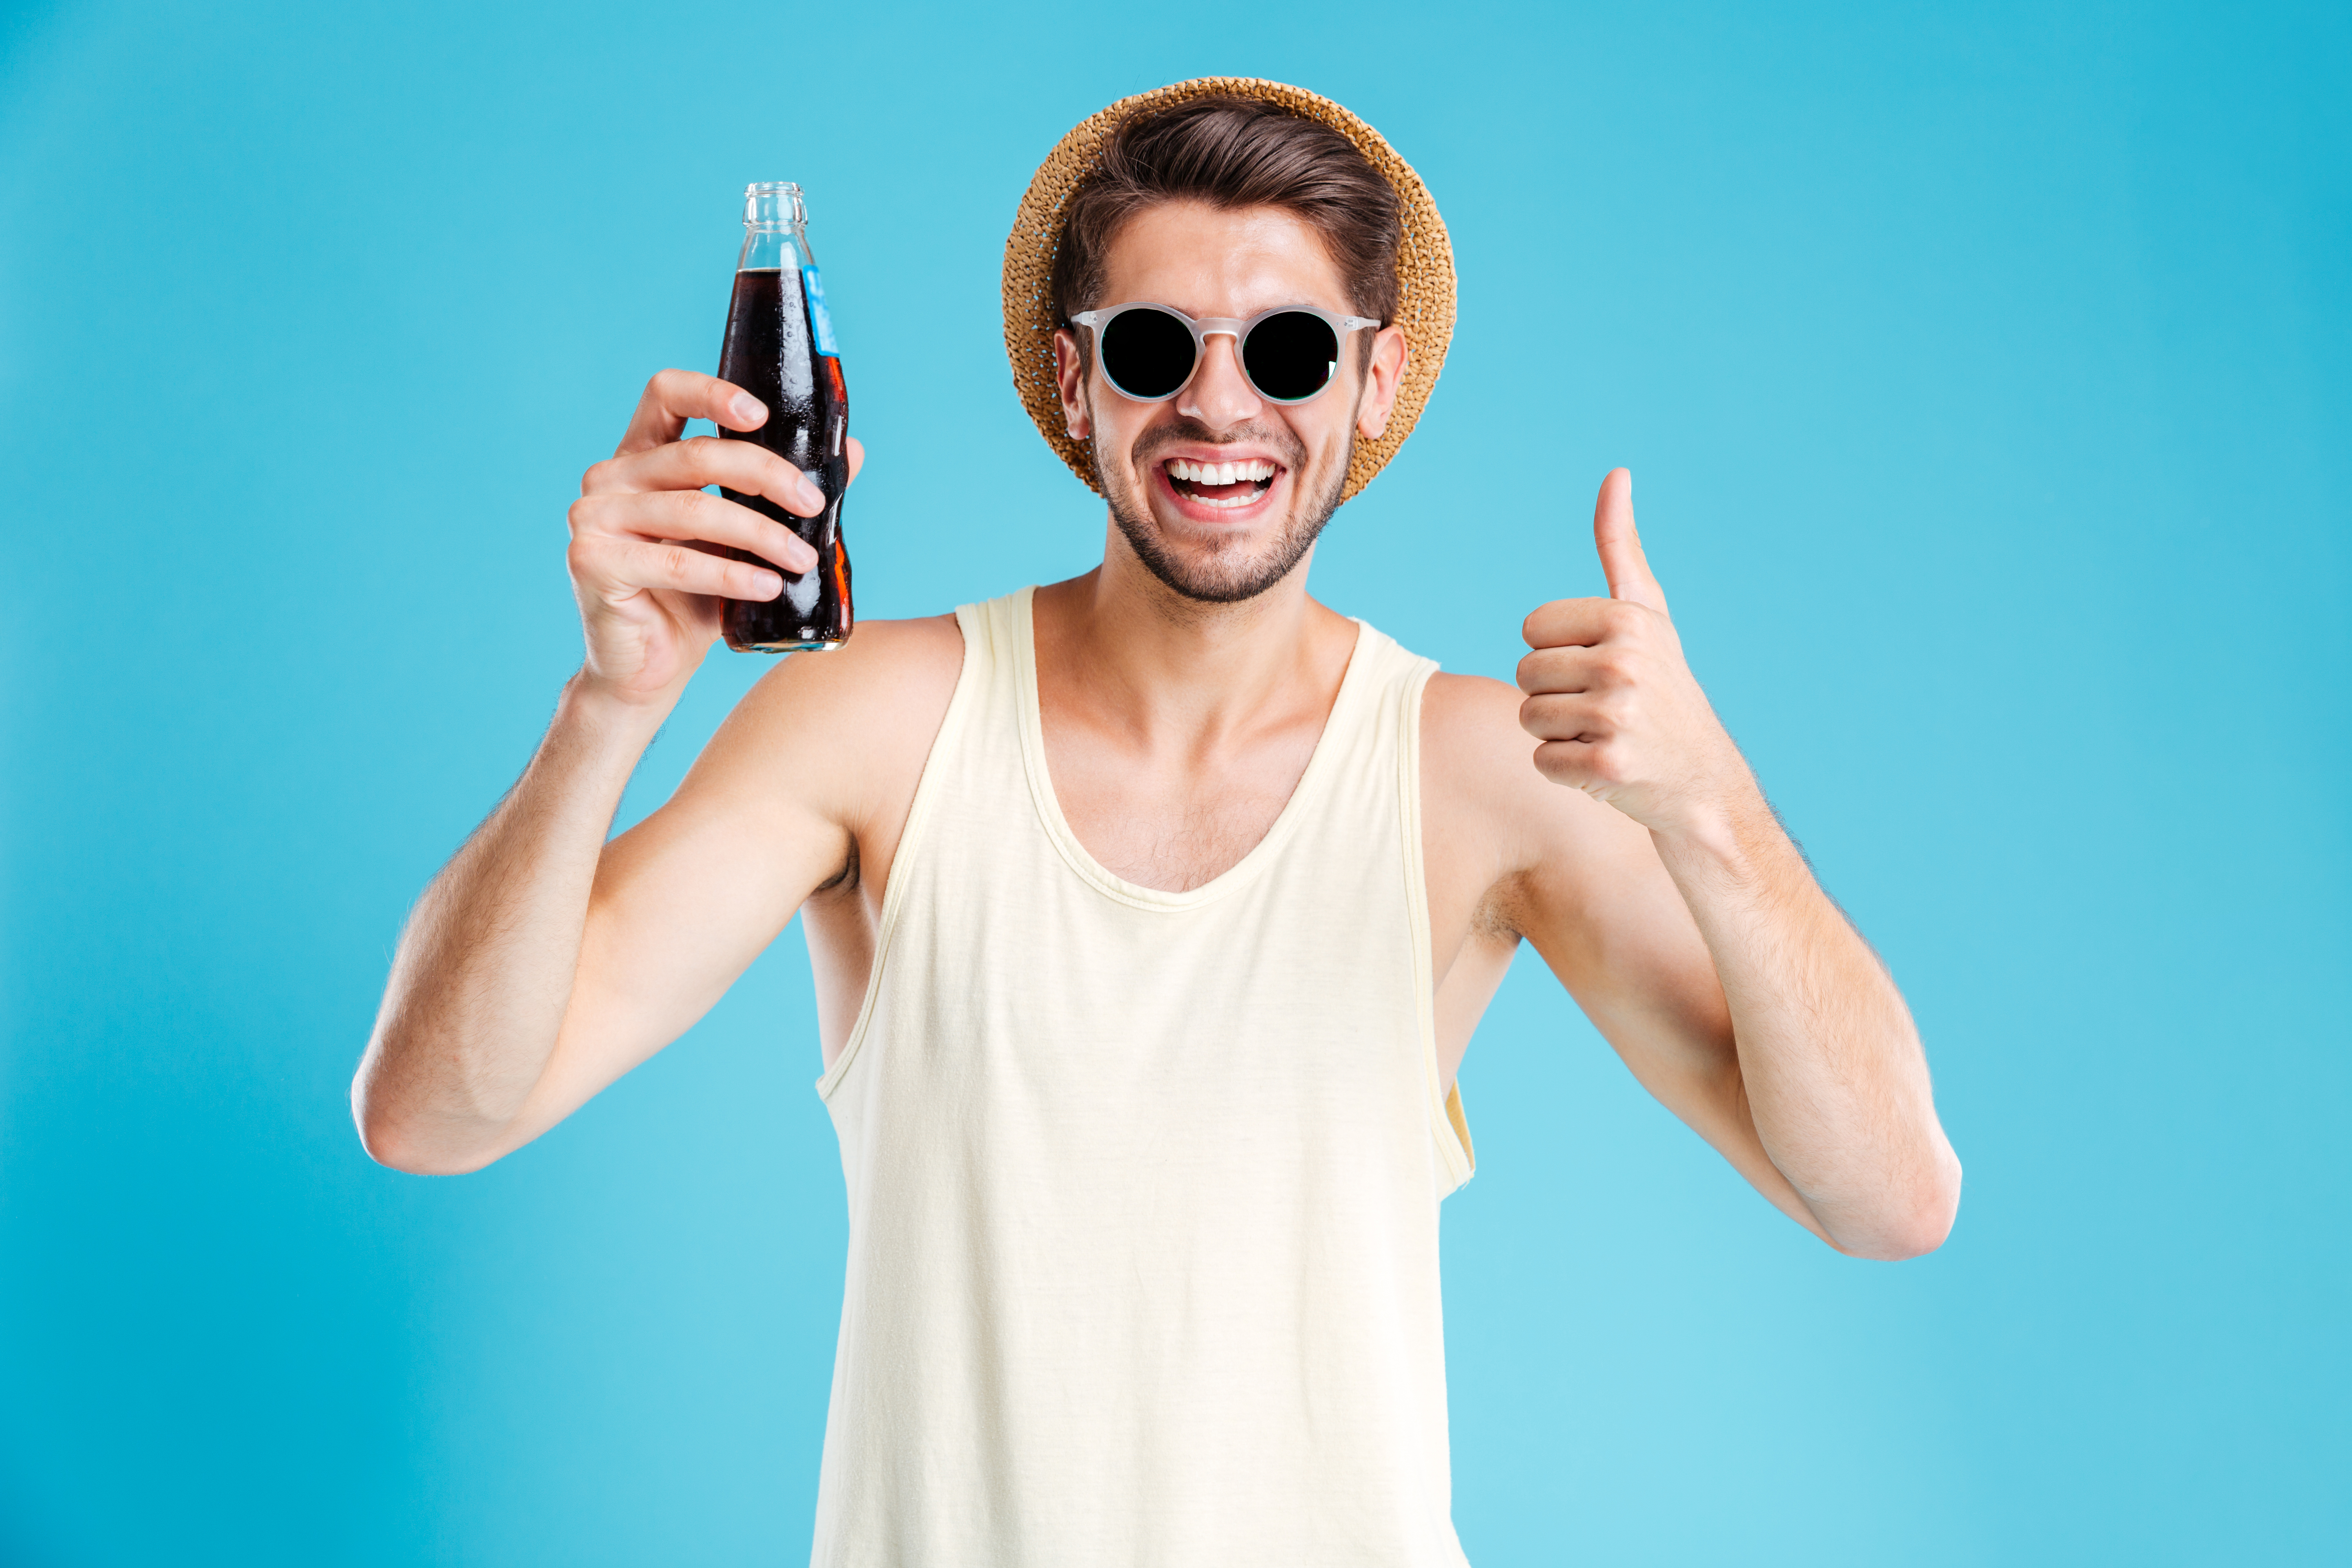 A happy young man holding a soda | Source: Shutterstock